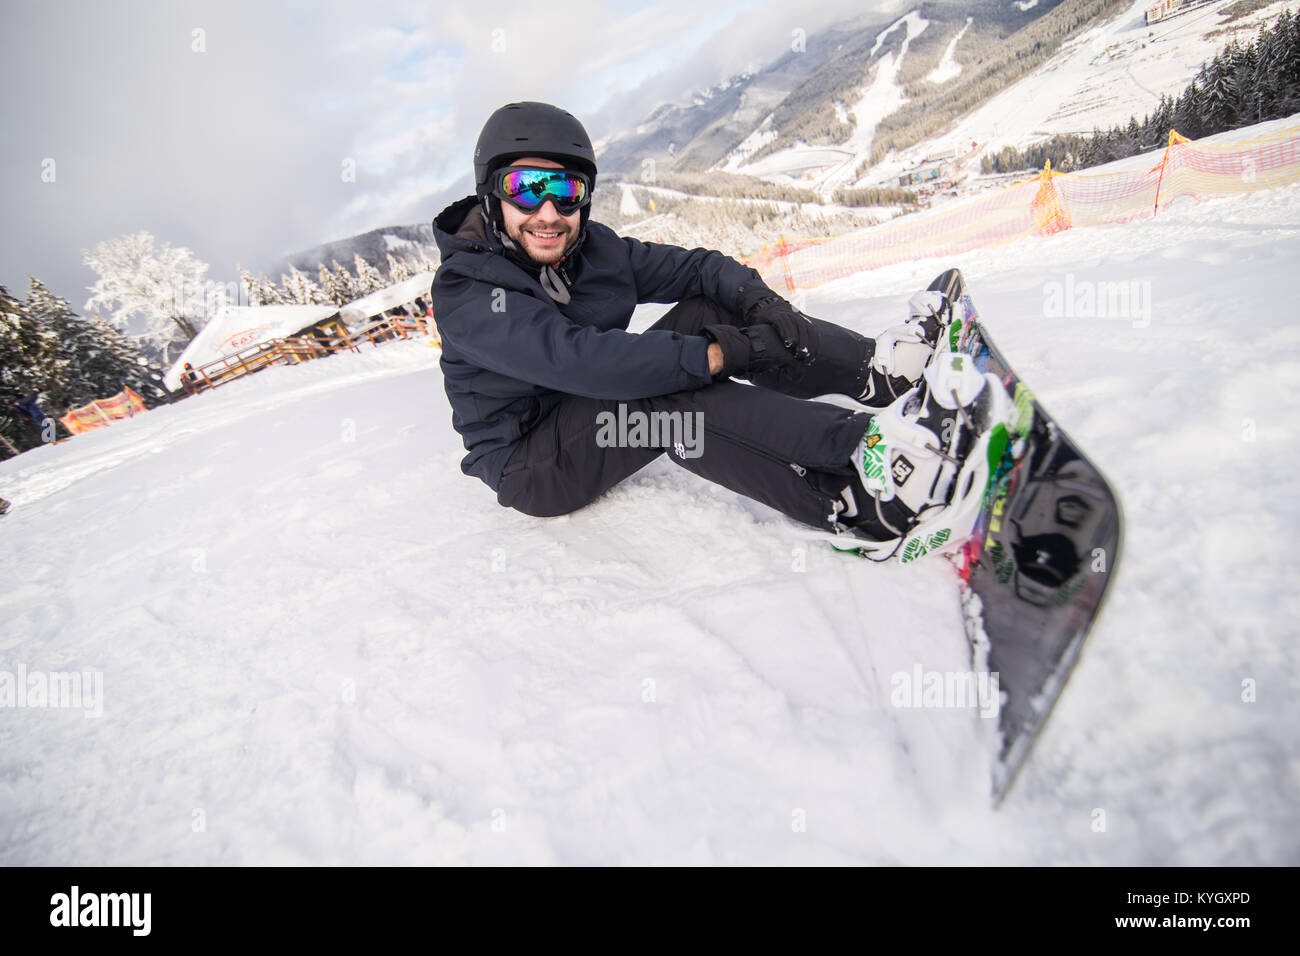 Snowboarder sitting on a ski slope on hill Stock Photo